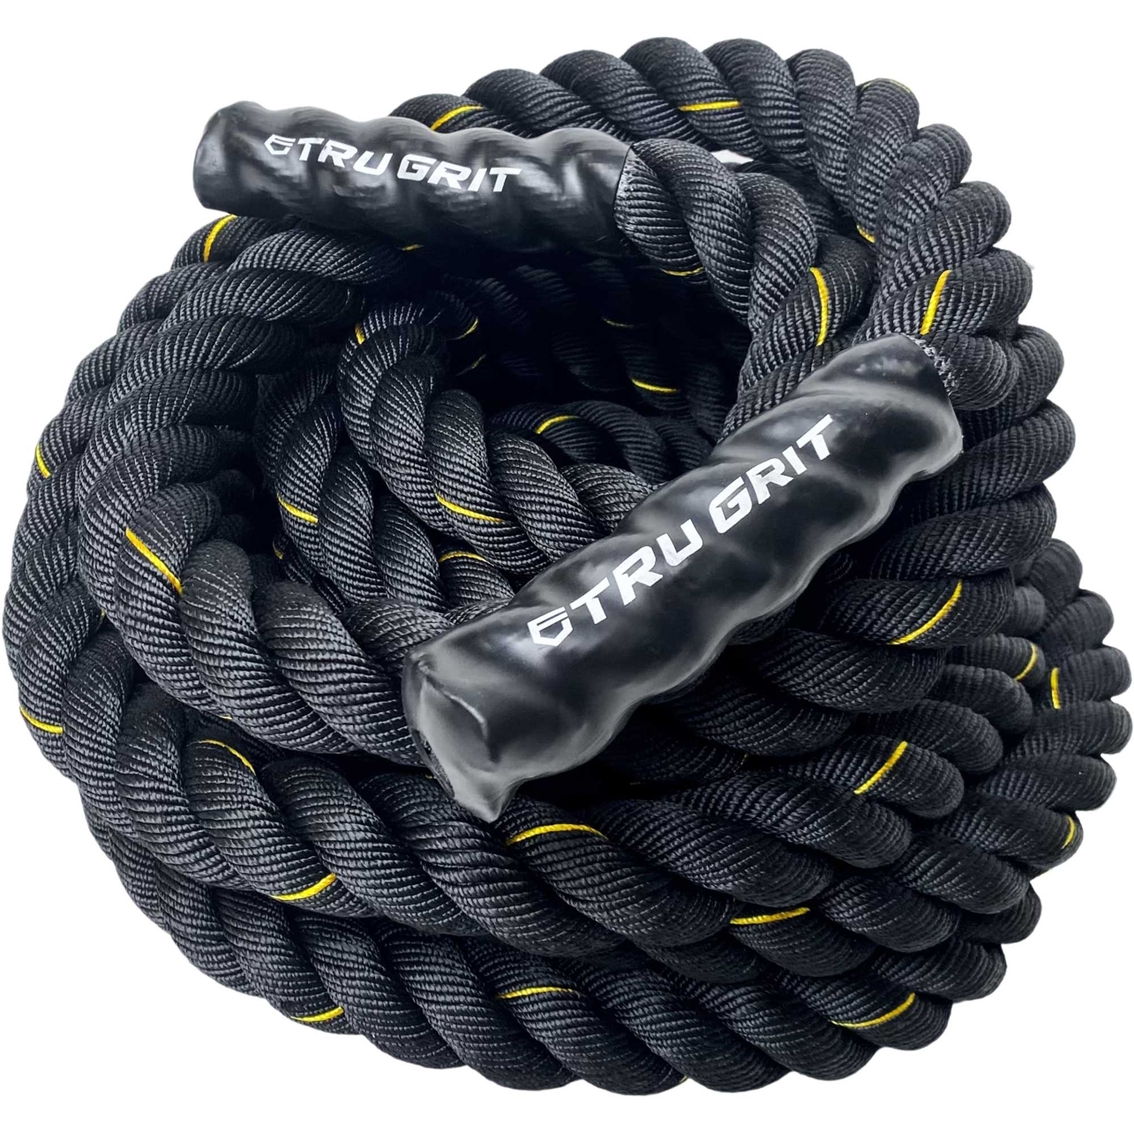 Tru Grit Fitness Battle Ropes 50 Ft., 30 Lb. | Fitness Accessories ...